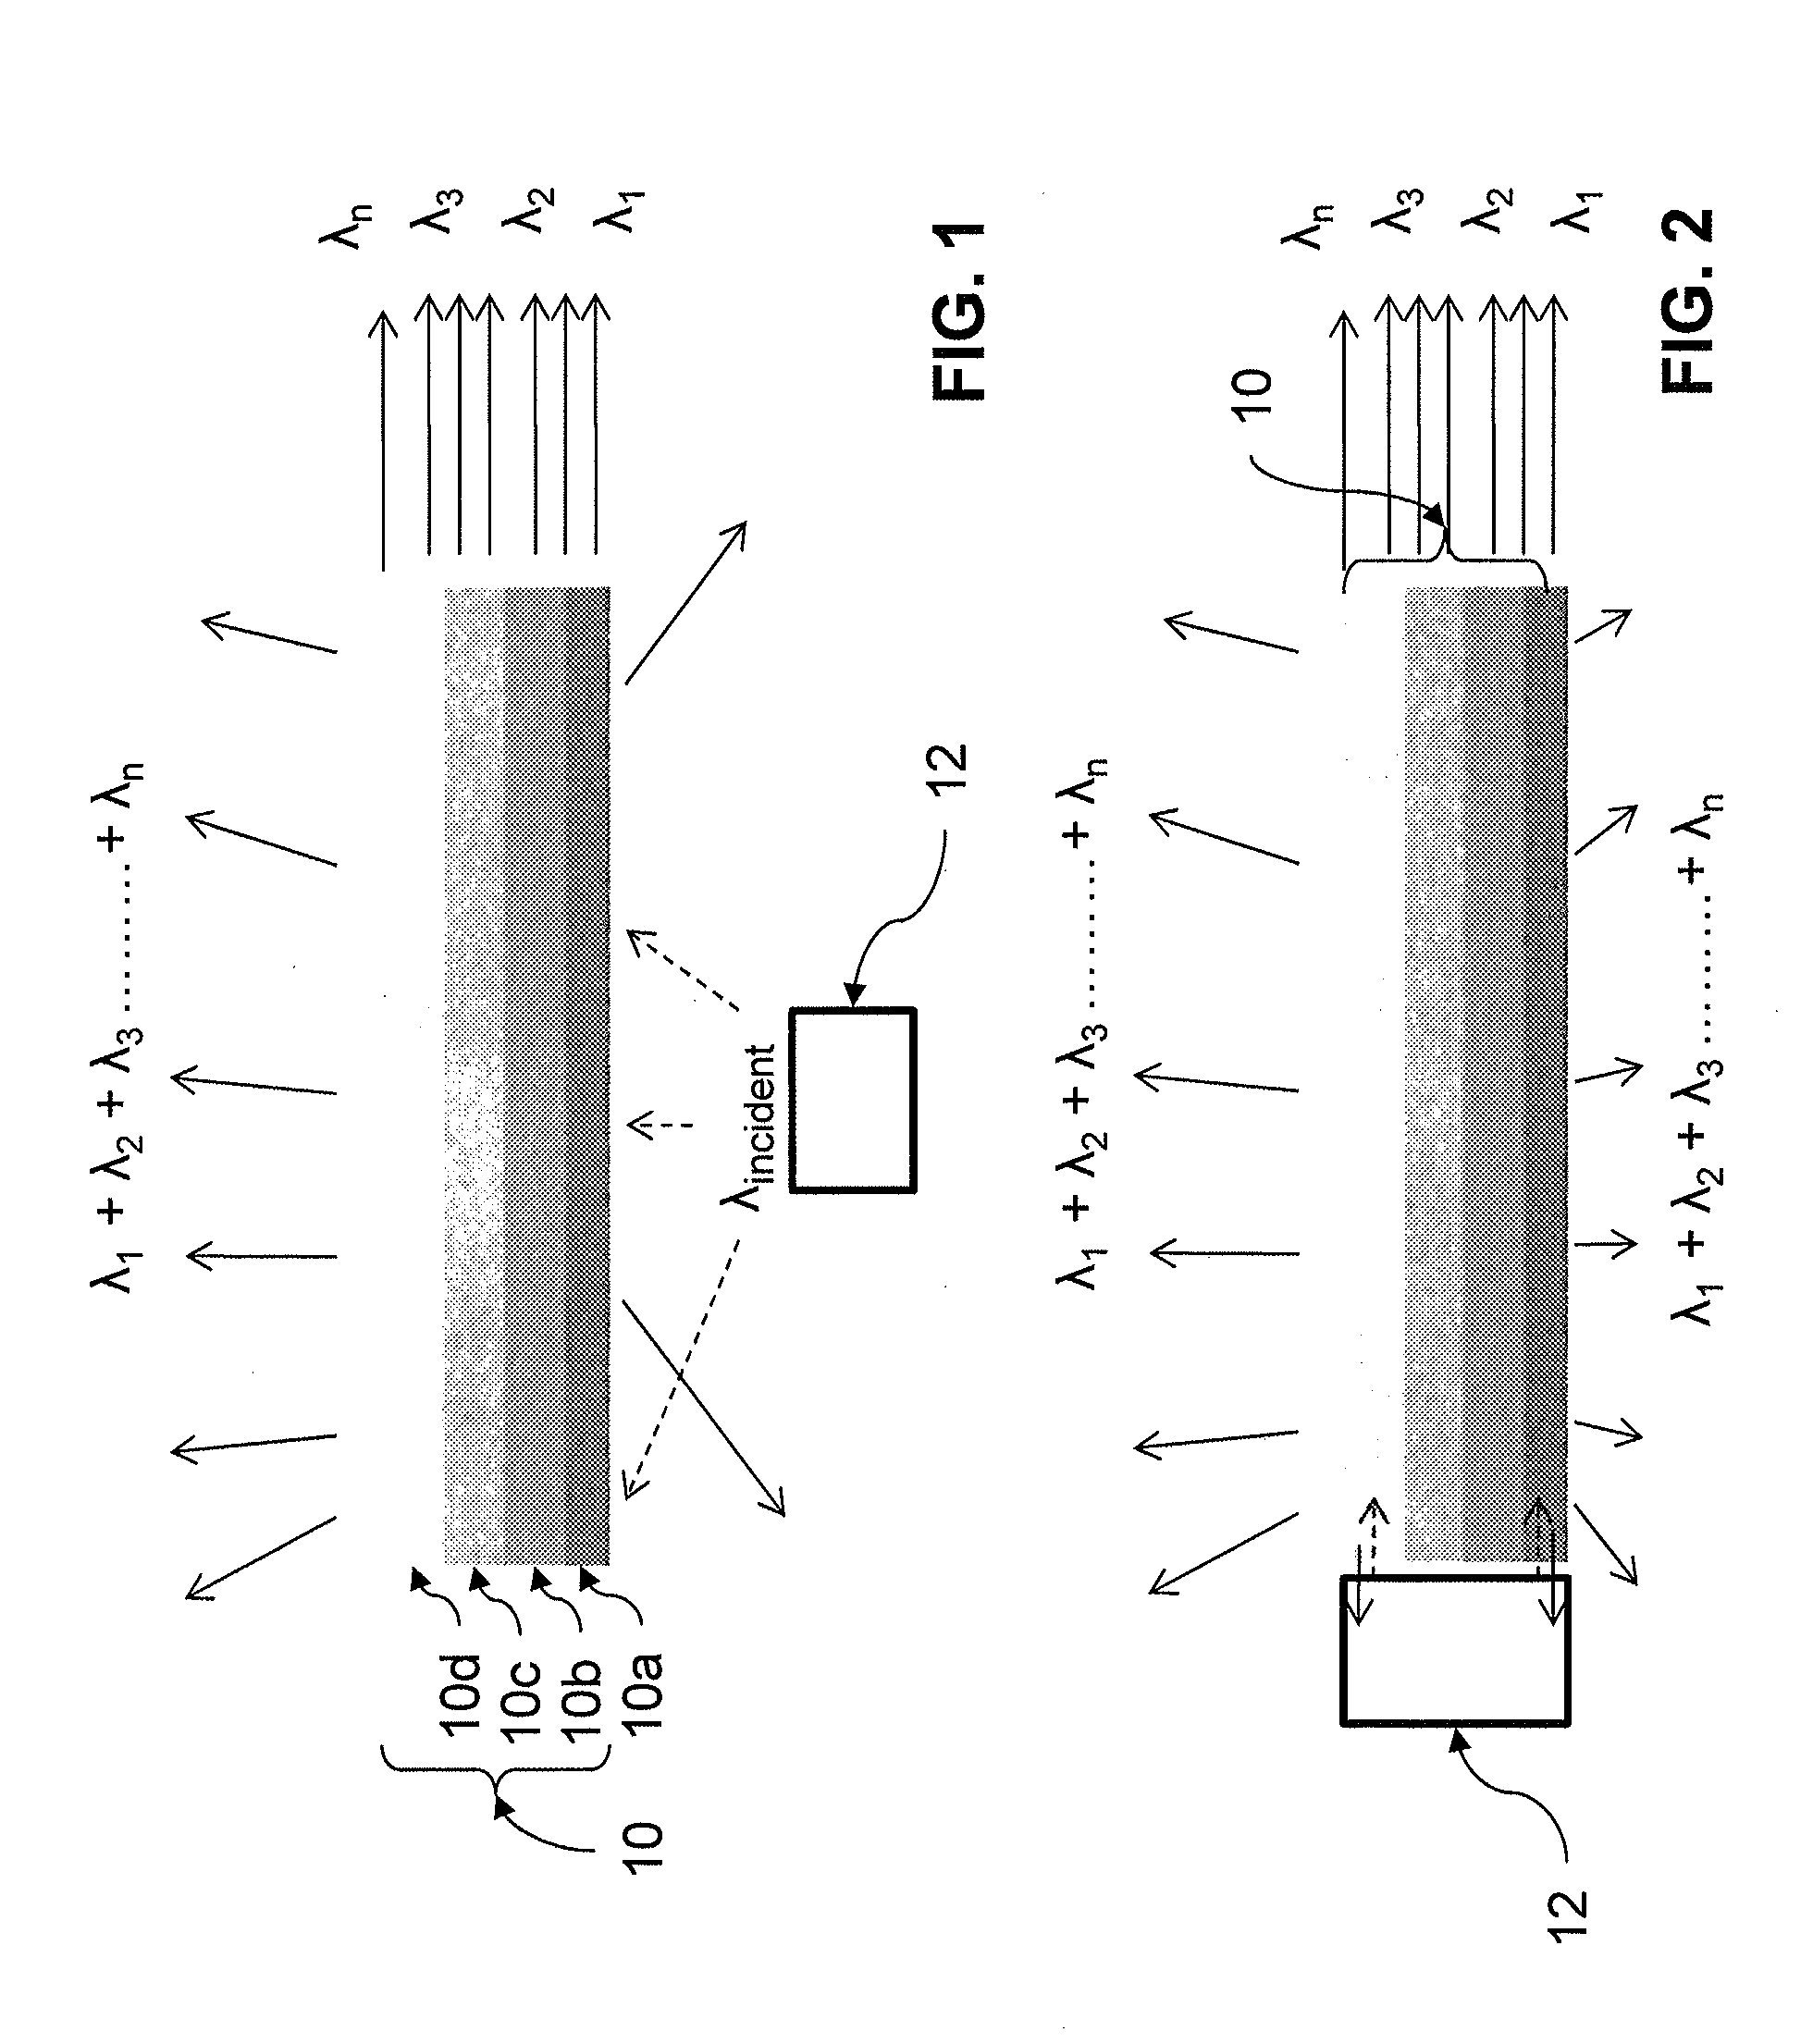 Full spectrum solid state white light source, method for manufacturing and applications